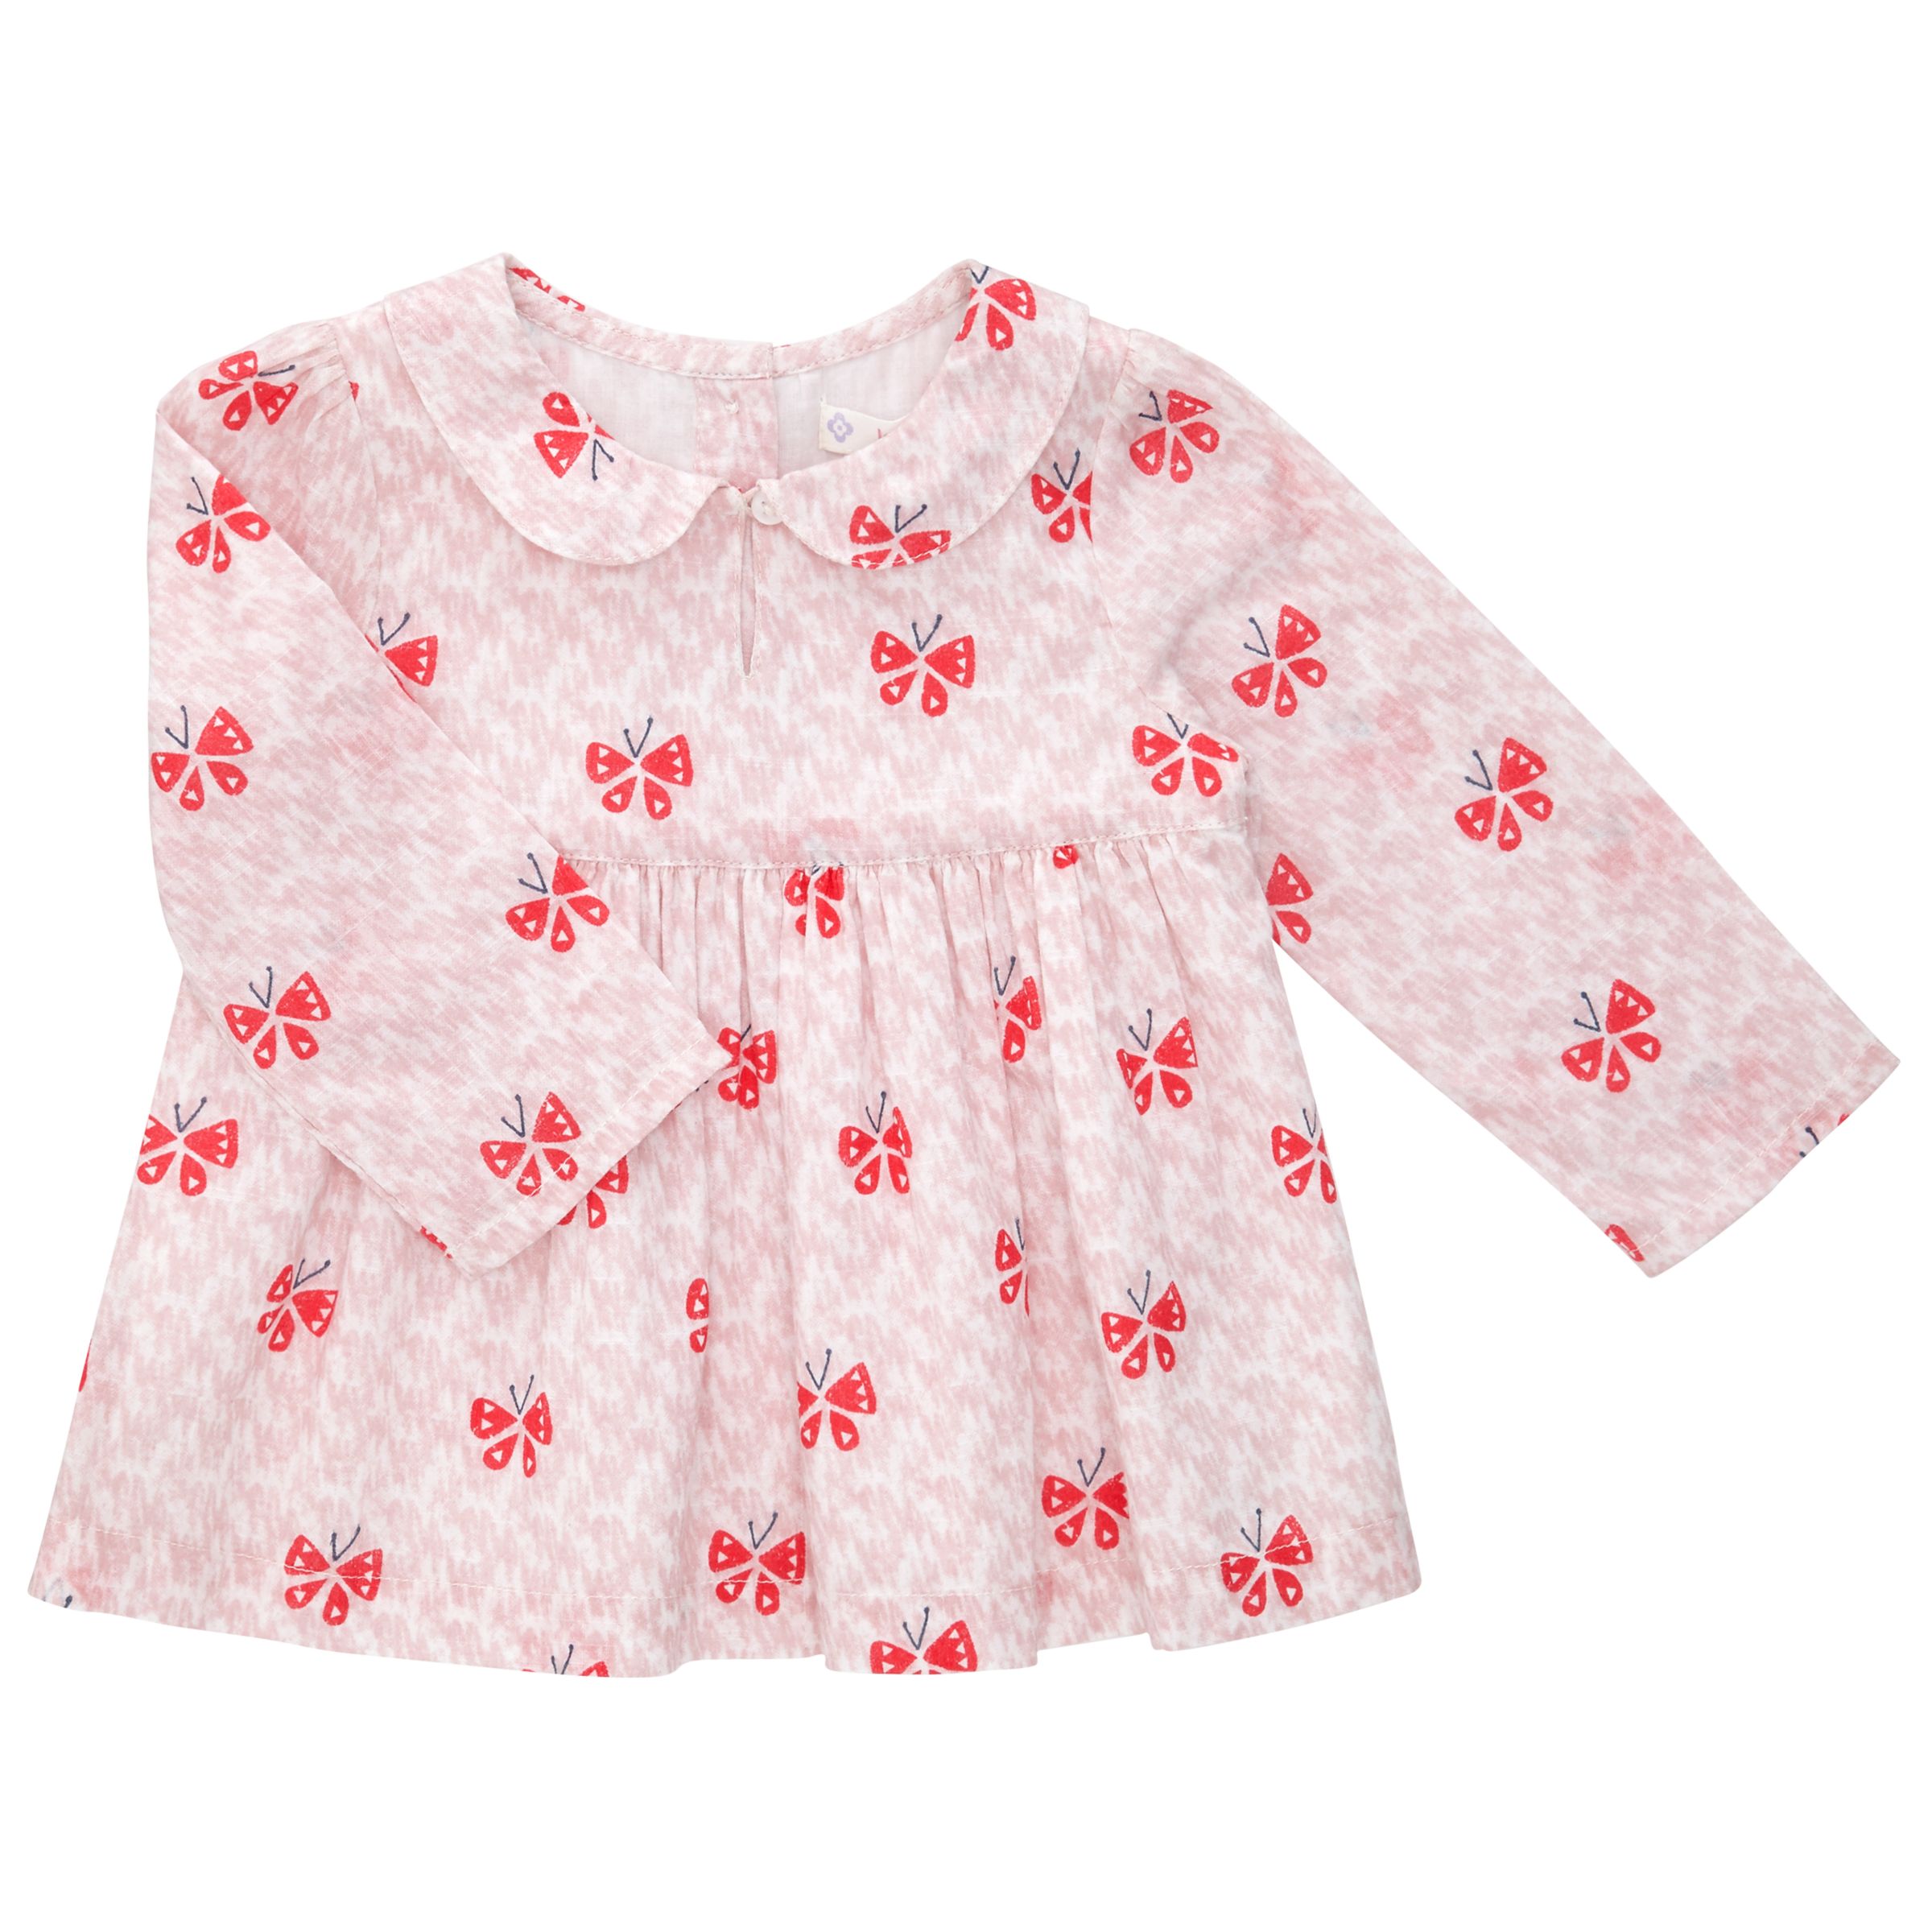 John Lewis & Partners Baby Butterfly Woven Top, Pink